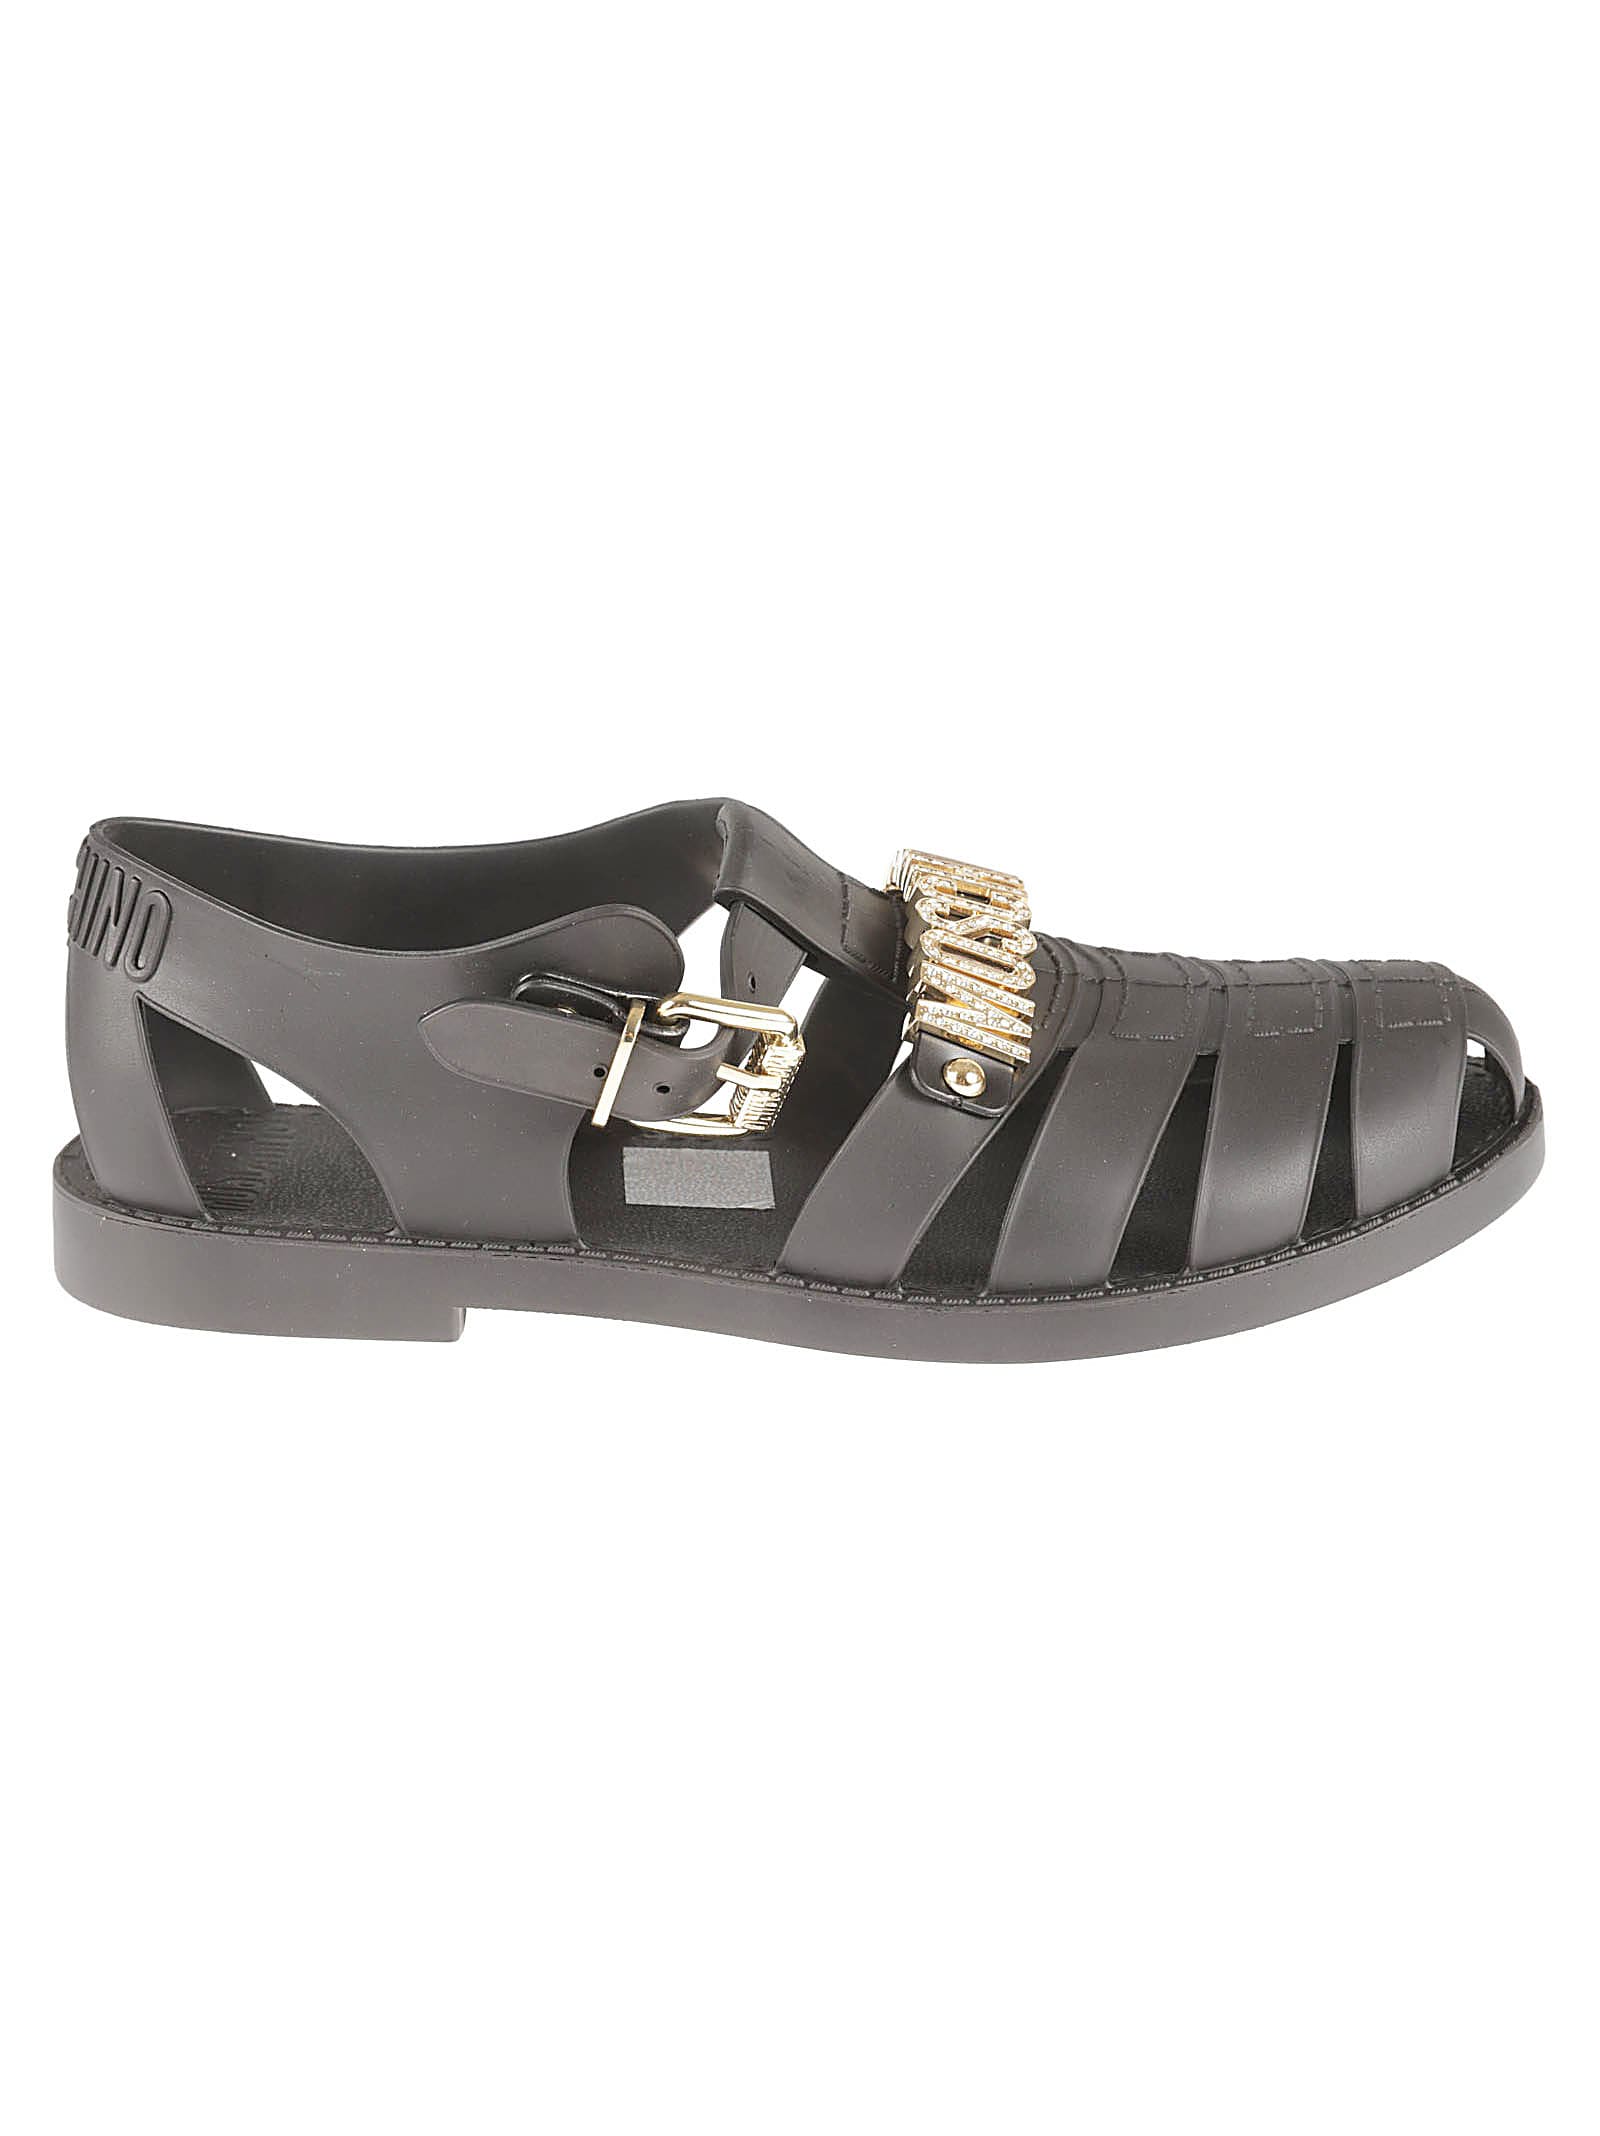 Moschino Lettering Logo Jelly Sandals In Black/gold